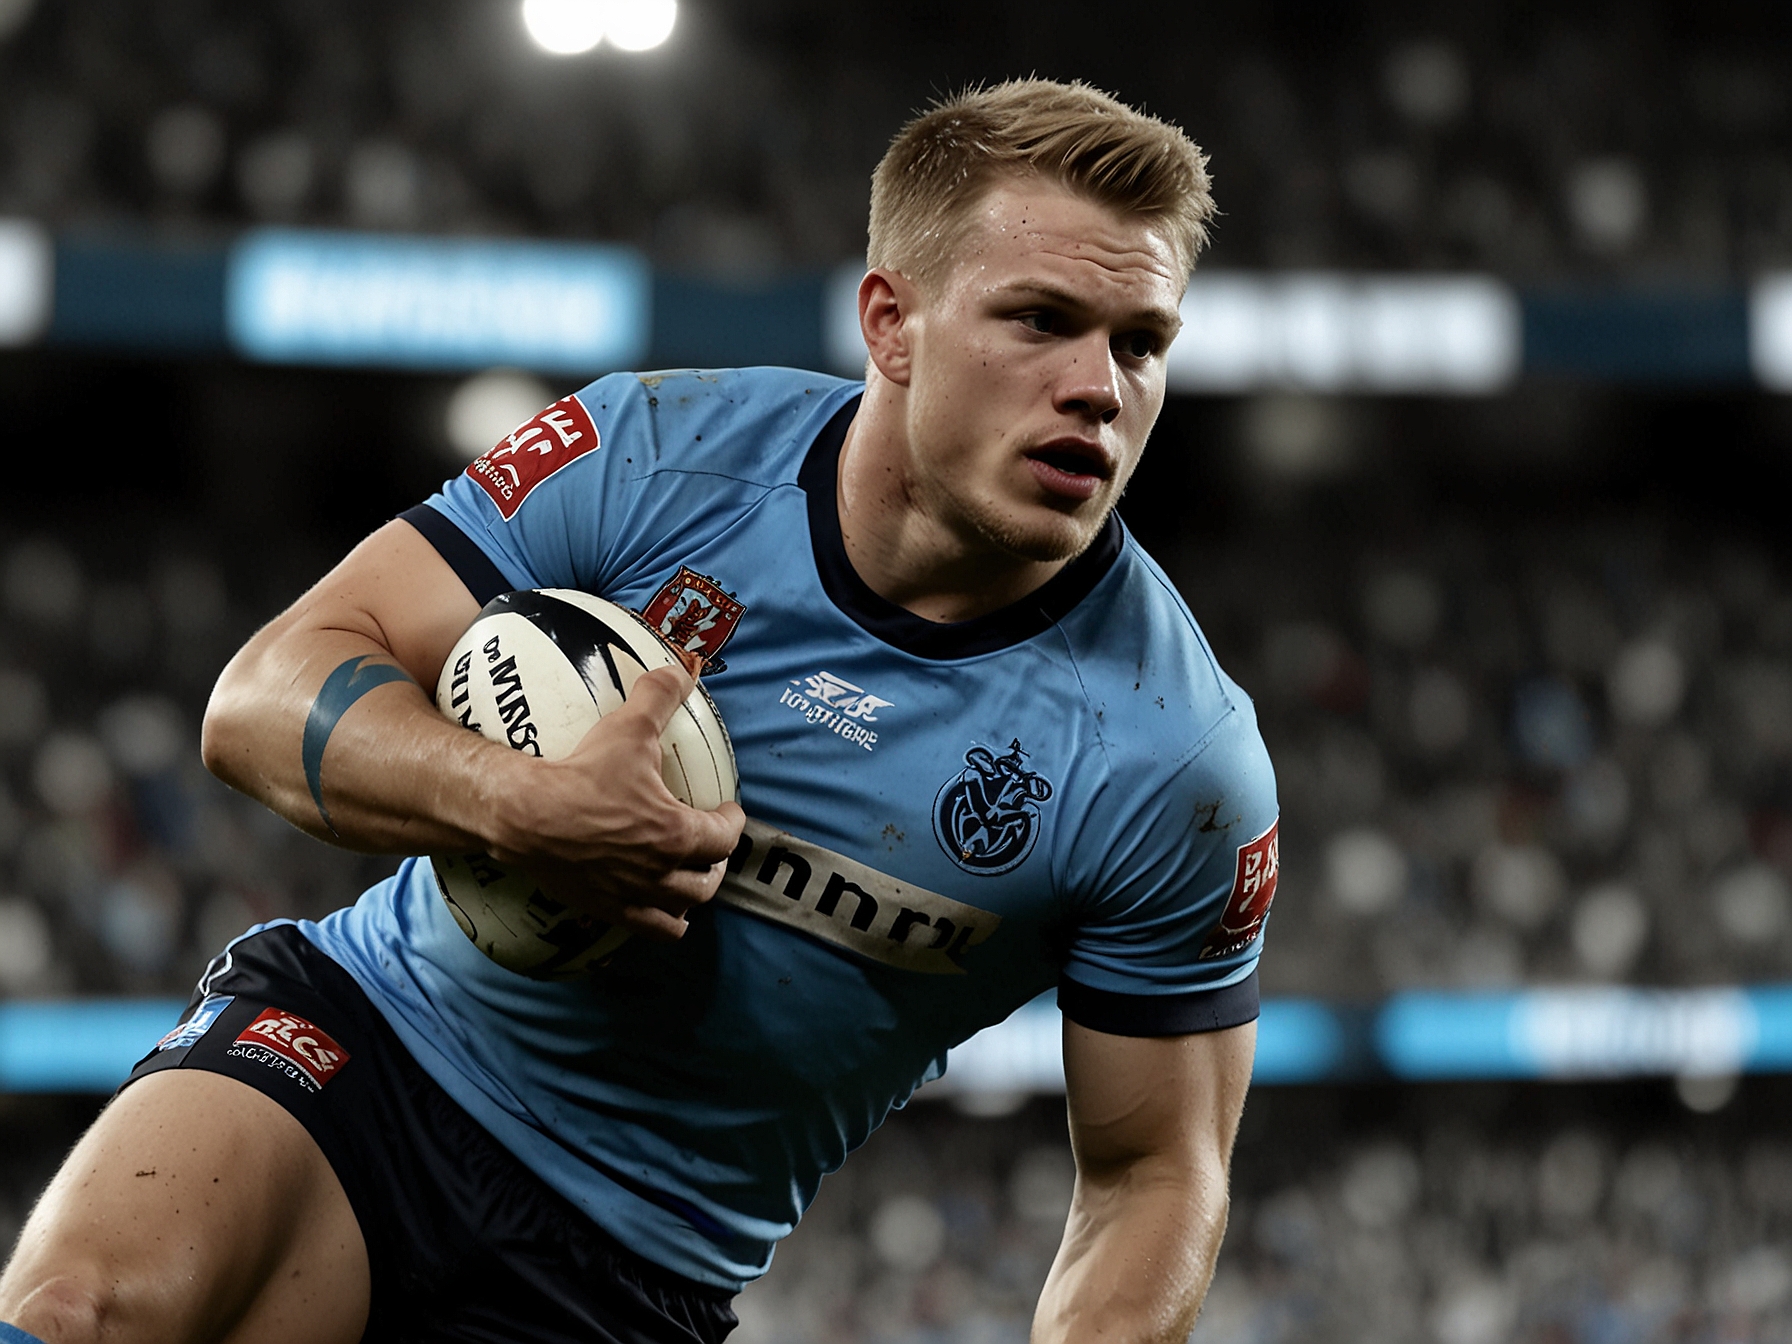 Jake Trbojevic in action during a State of Origin match, showcasing his defensive prowess and relentless work ethic that make him indispensable to the New South Wales Blues.